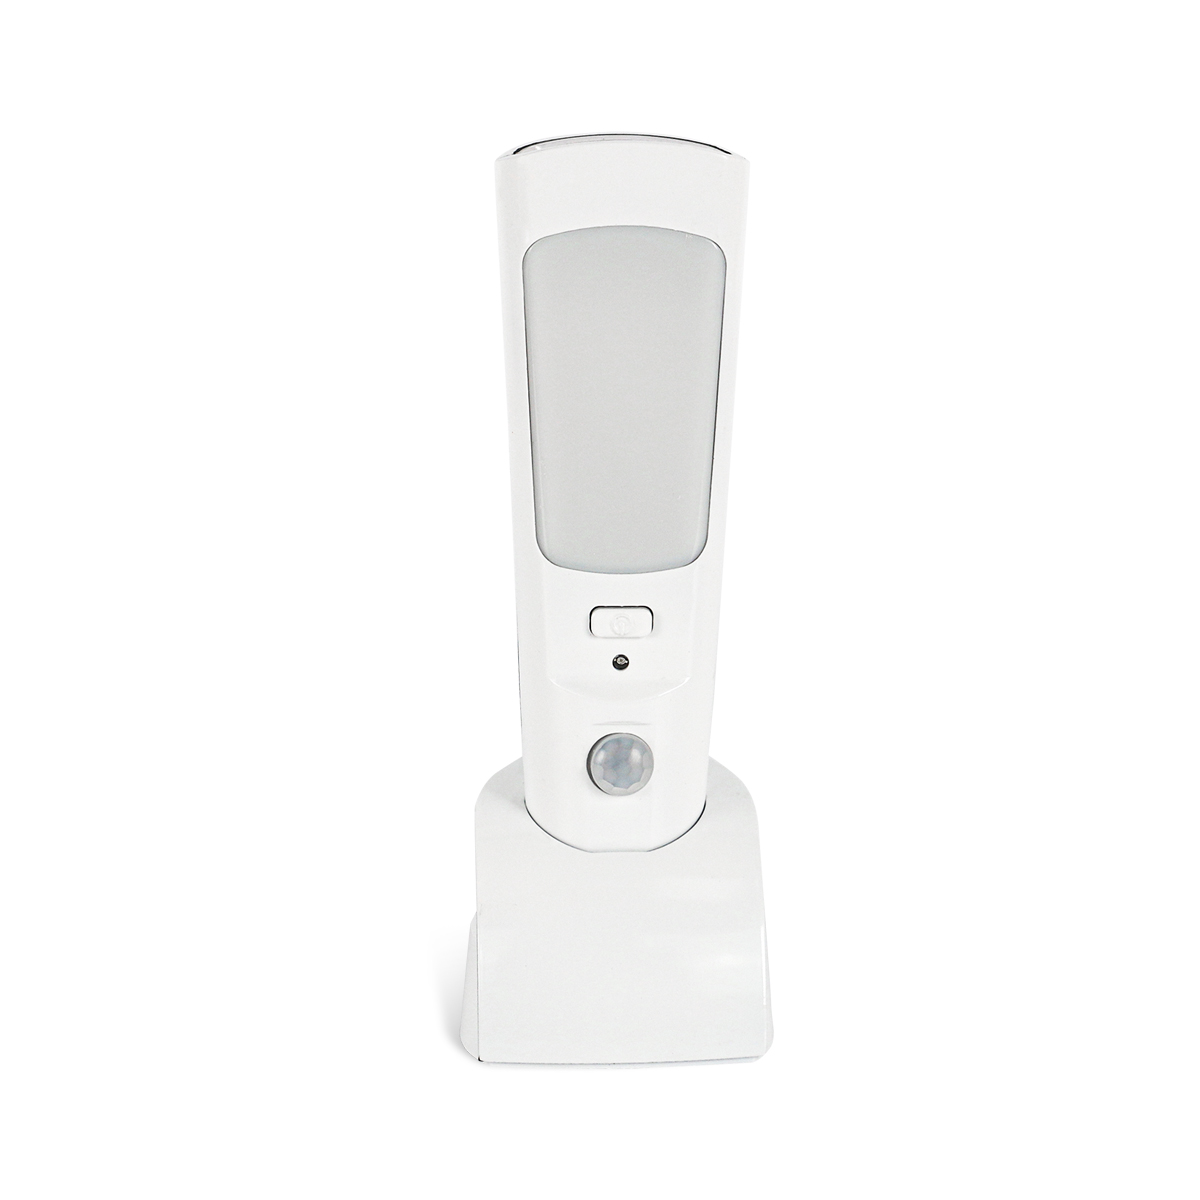 Inductive night light, can be used as a flashlight2